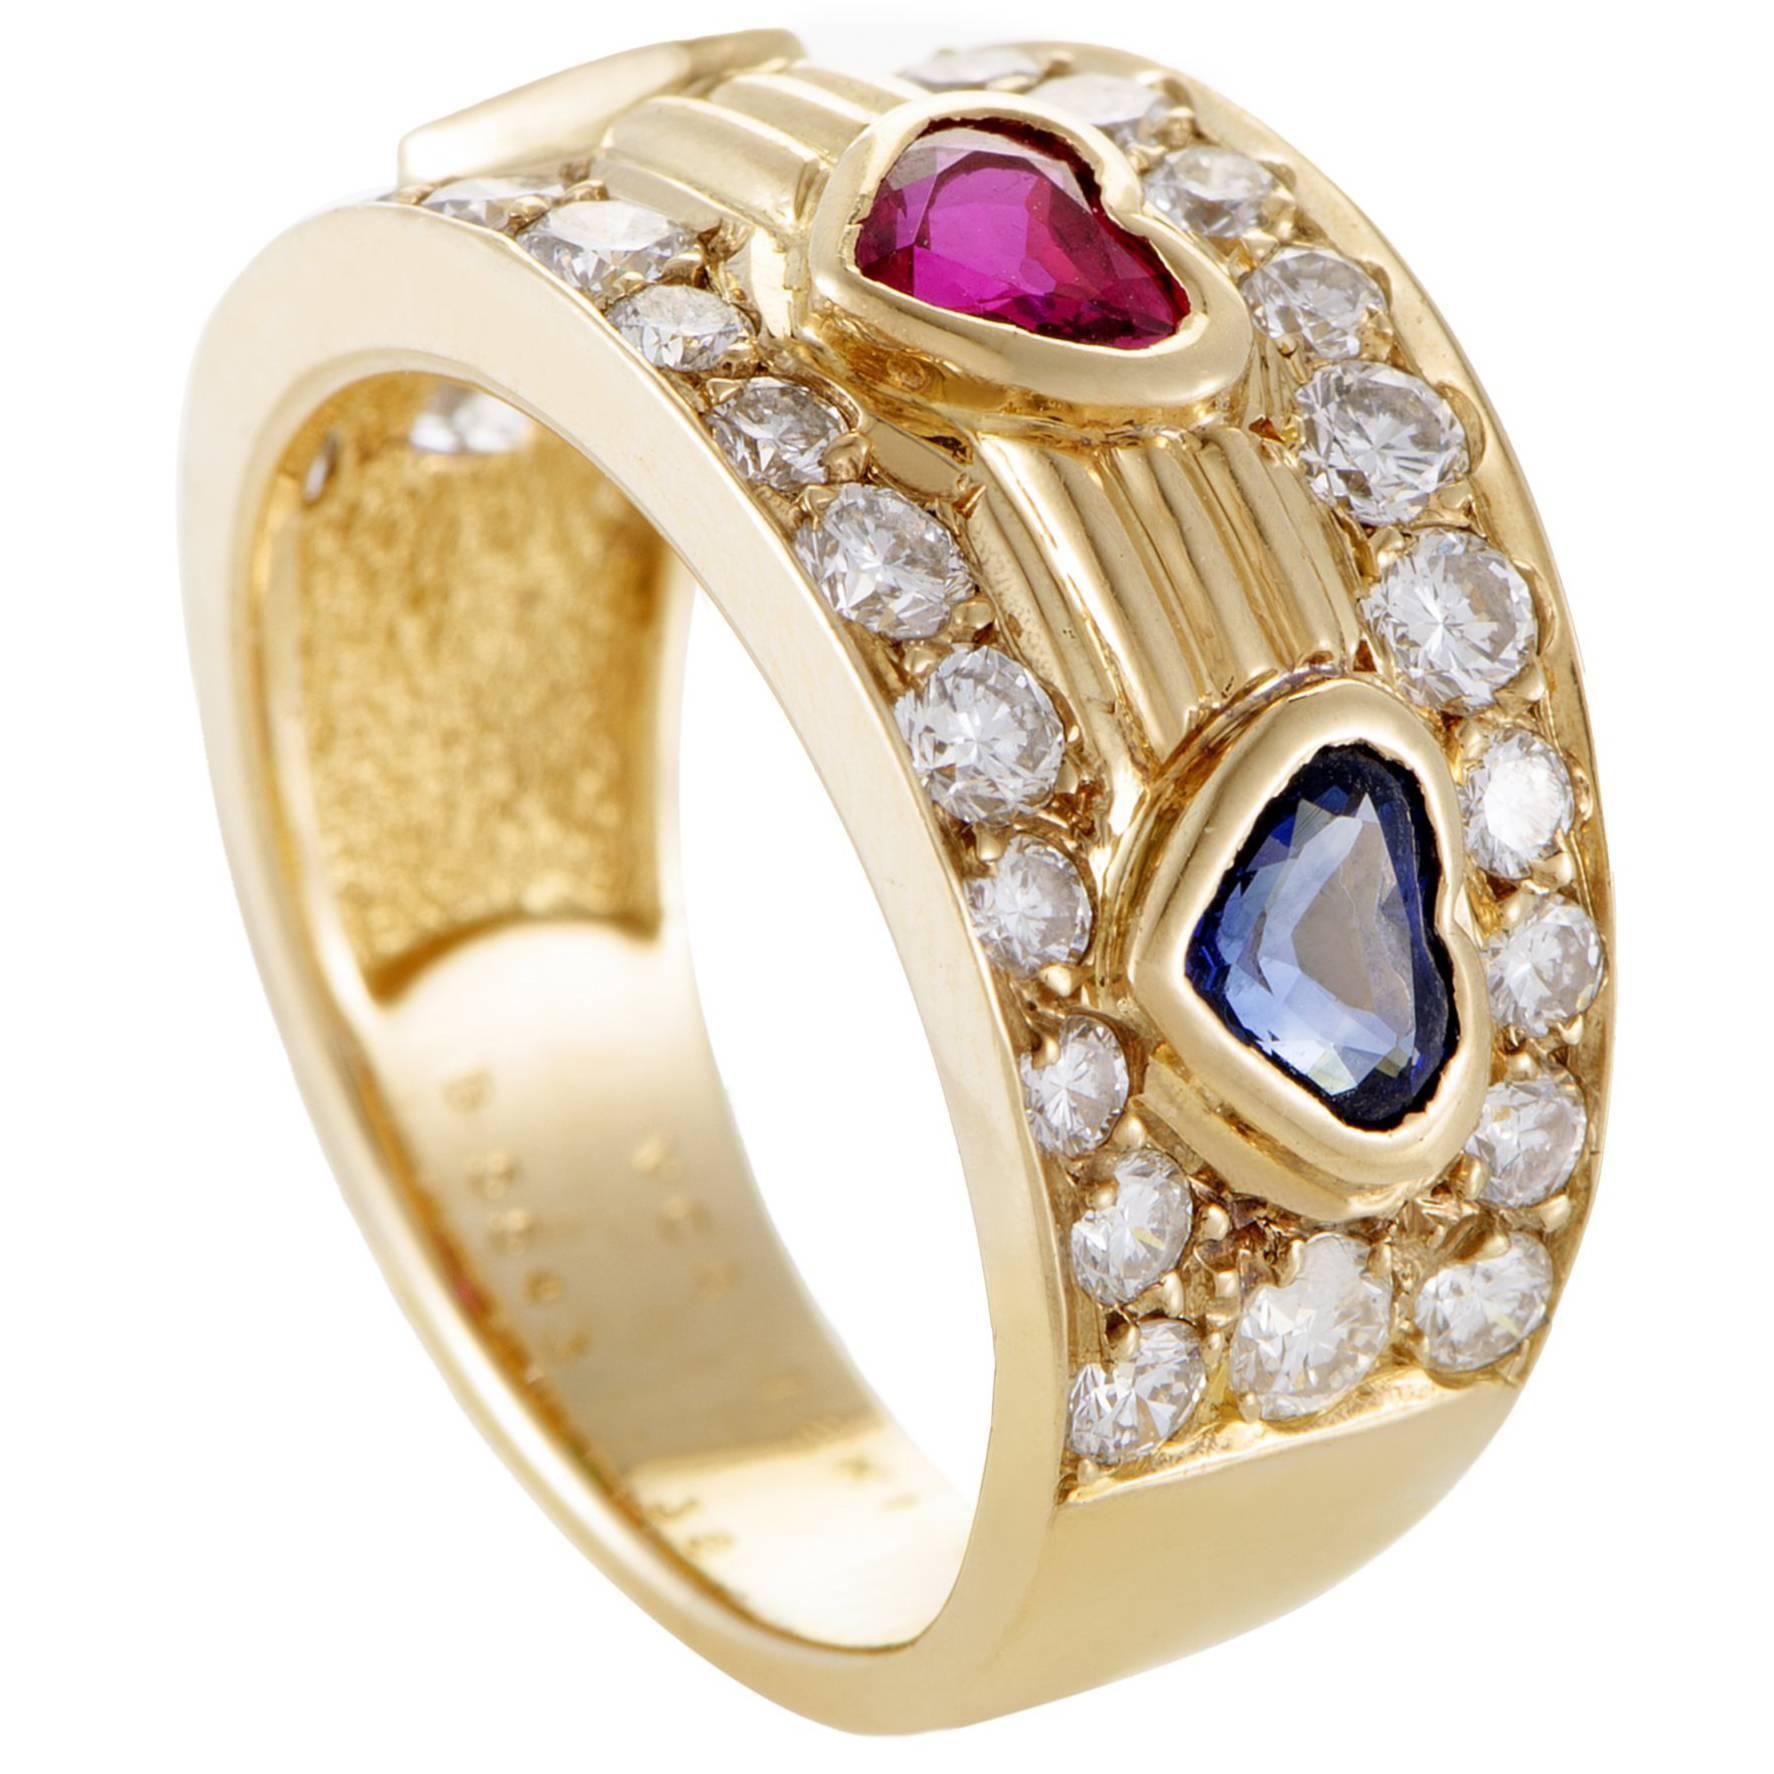 Van Cleef & Arpels Diamond Emerald Ruby and Sapphire Yellow Gold Band Ring